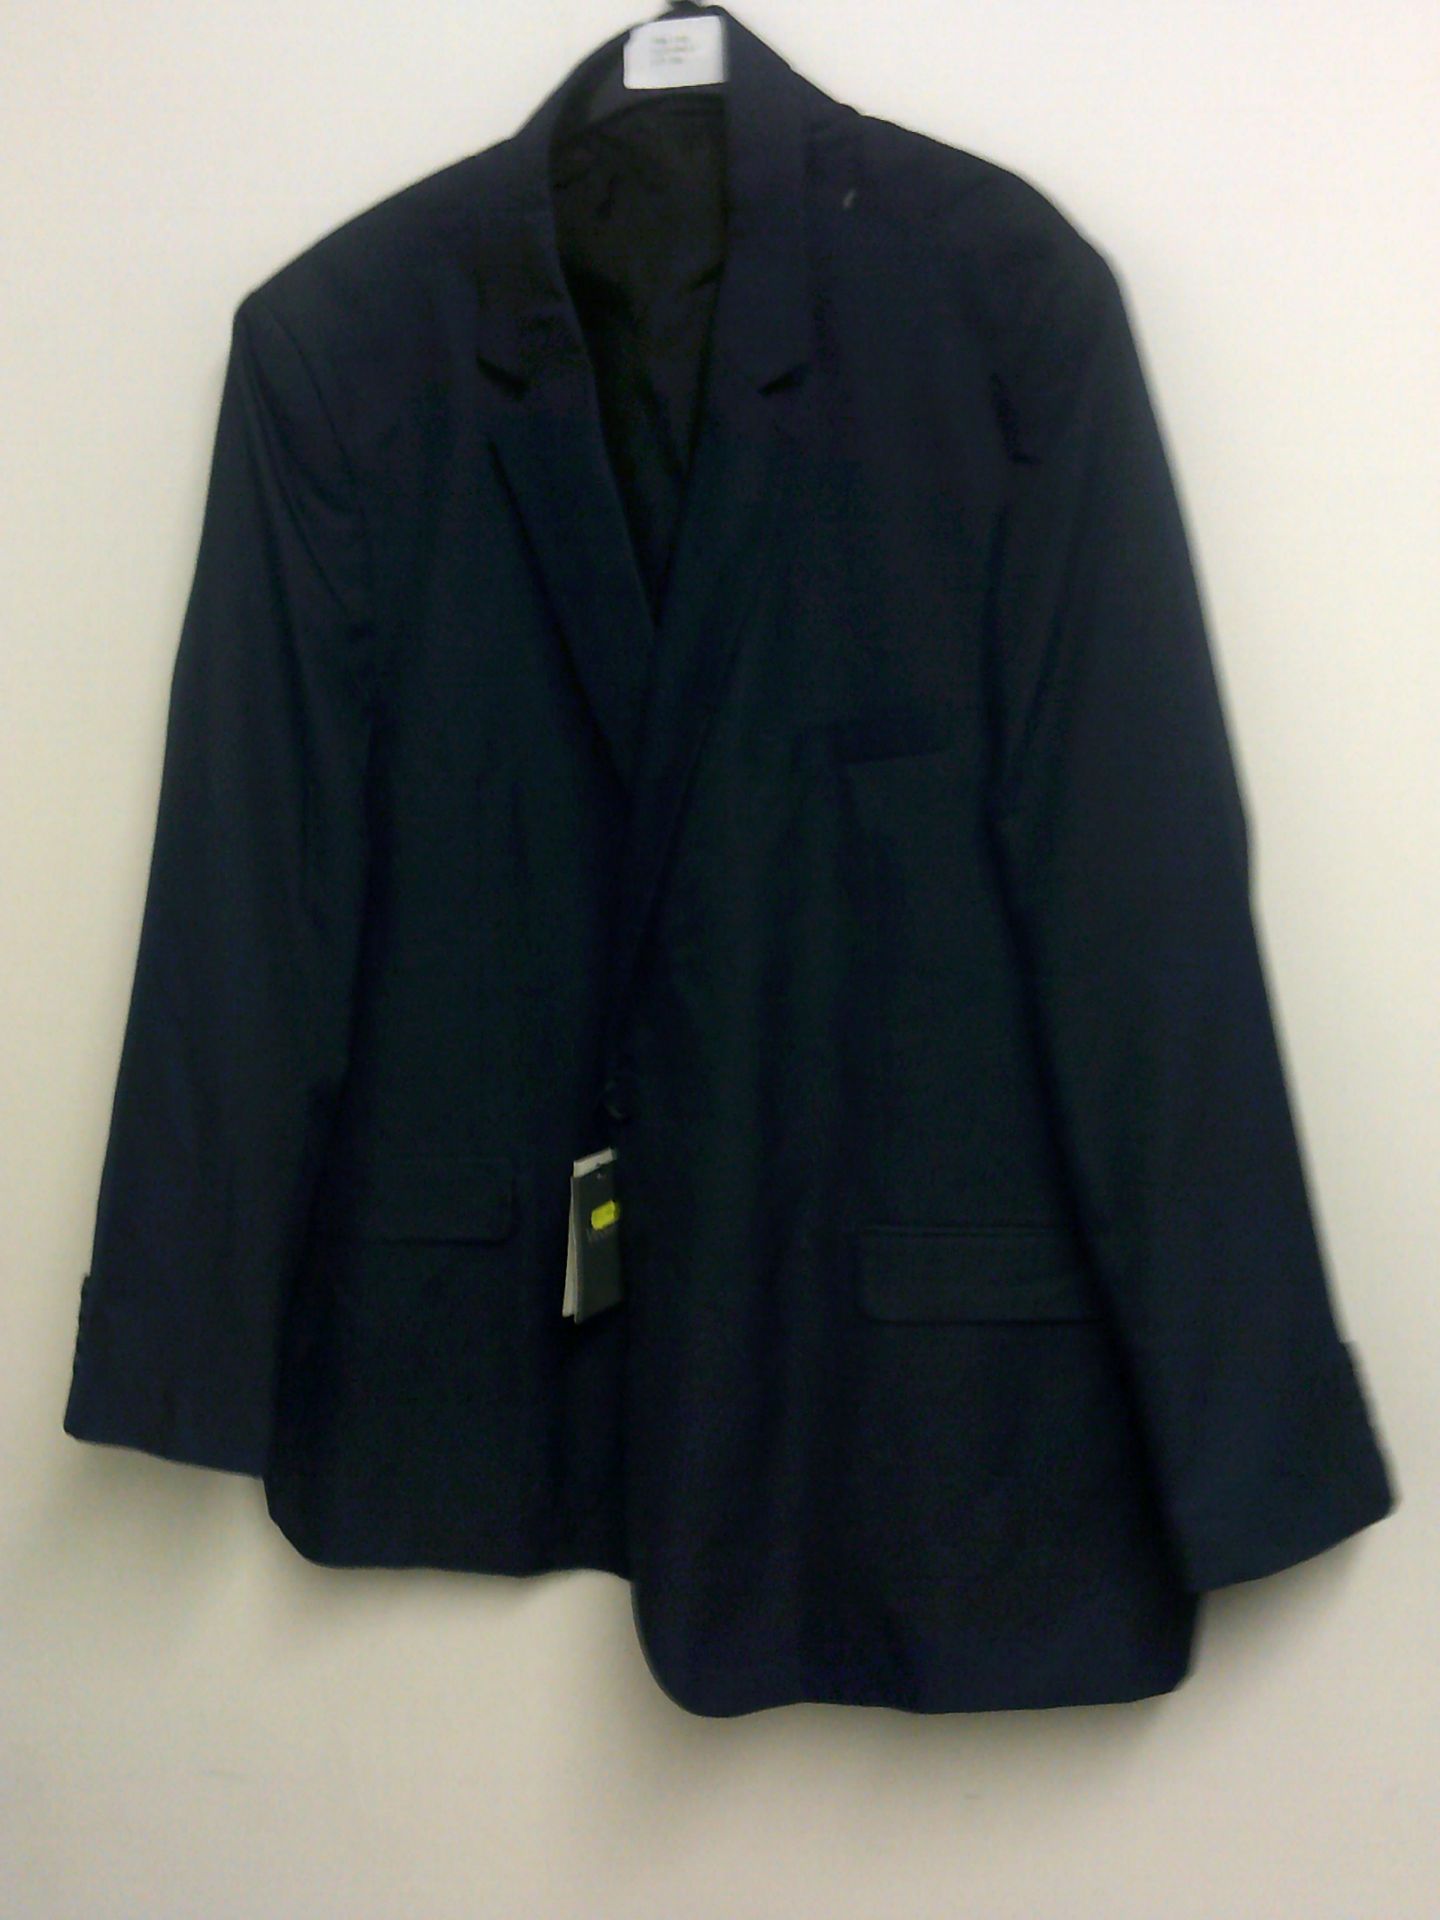 WILLIAMS & BROWN NAVY SUIT JACKET SIZE 58R